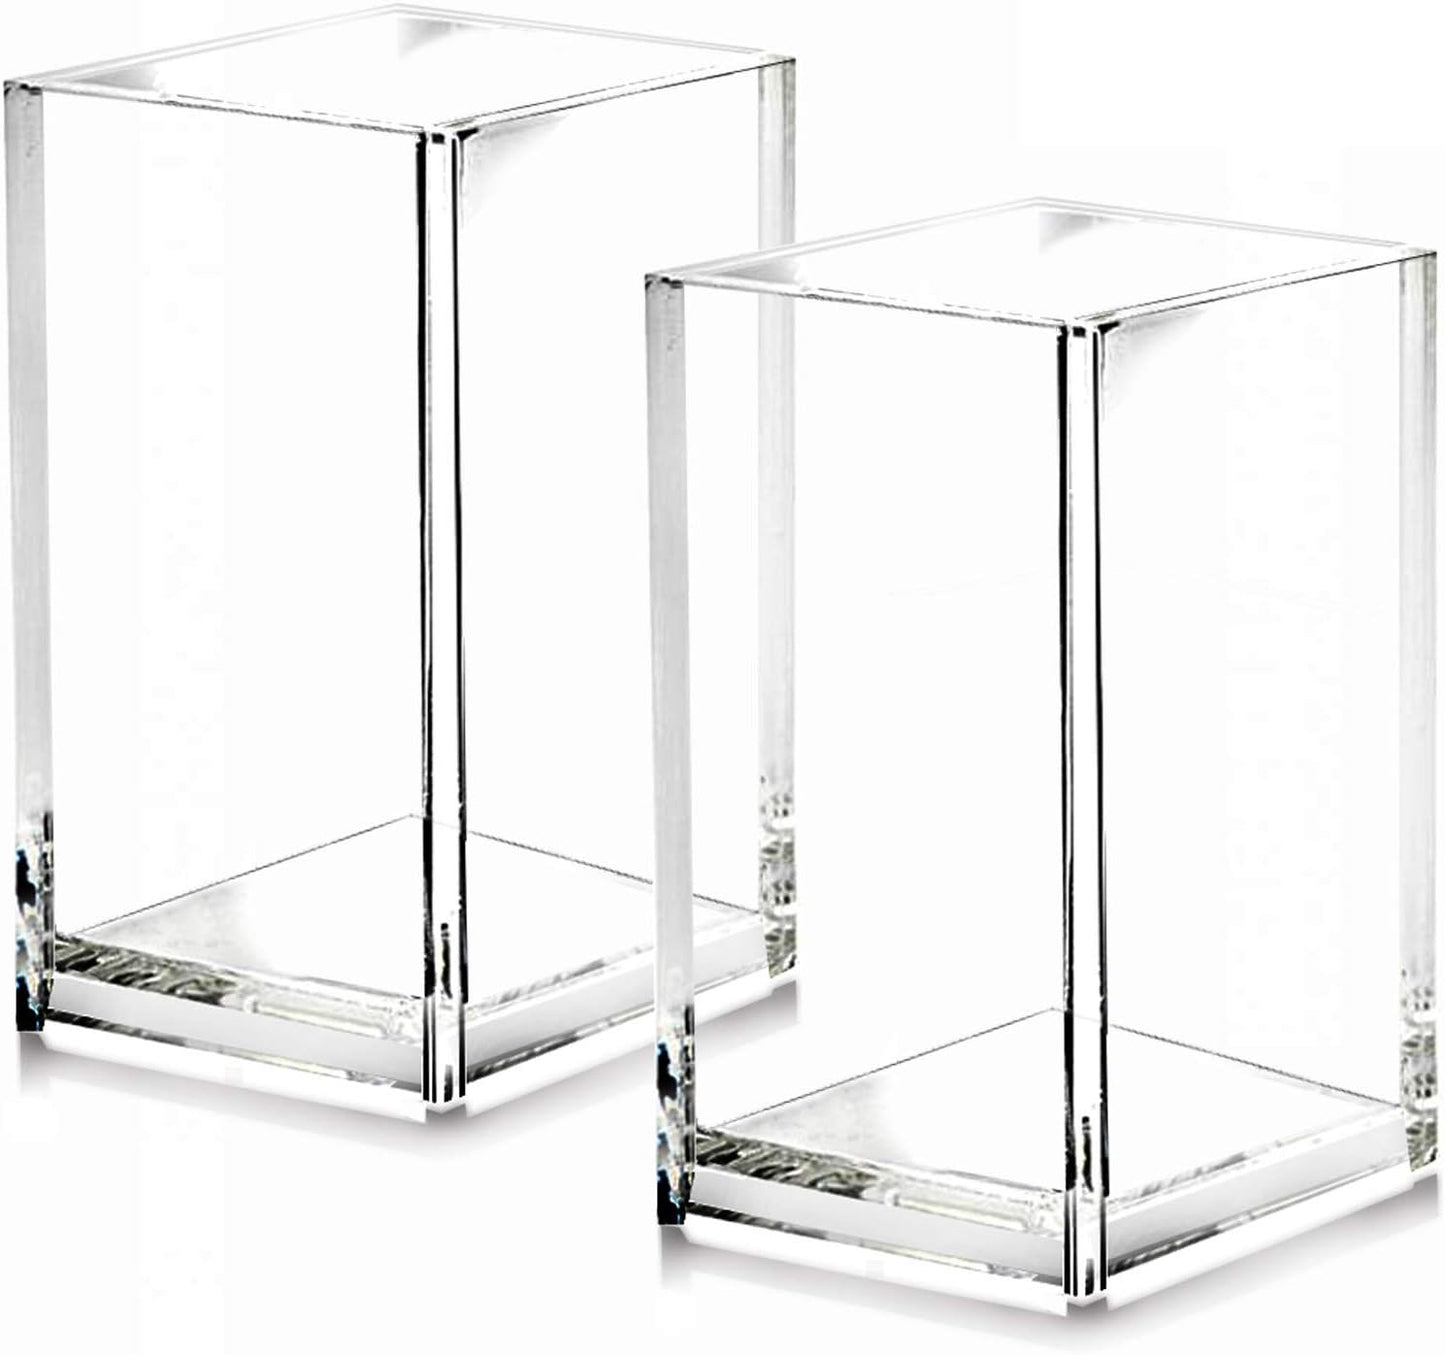 2 Pack Clear Acrylic Pencil Pen Holder Cup,Desk Accessories Holder,Makeup Brush Storage Organizer,Modern Design Desktop Stationery Organizer for Office School Home Supplies,2.6x 2.6x 4 inches